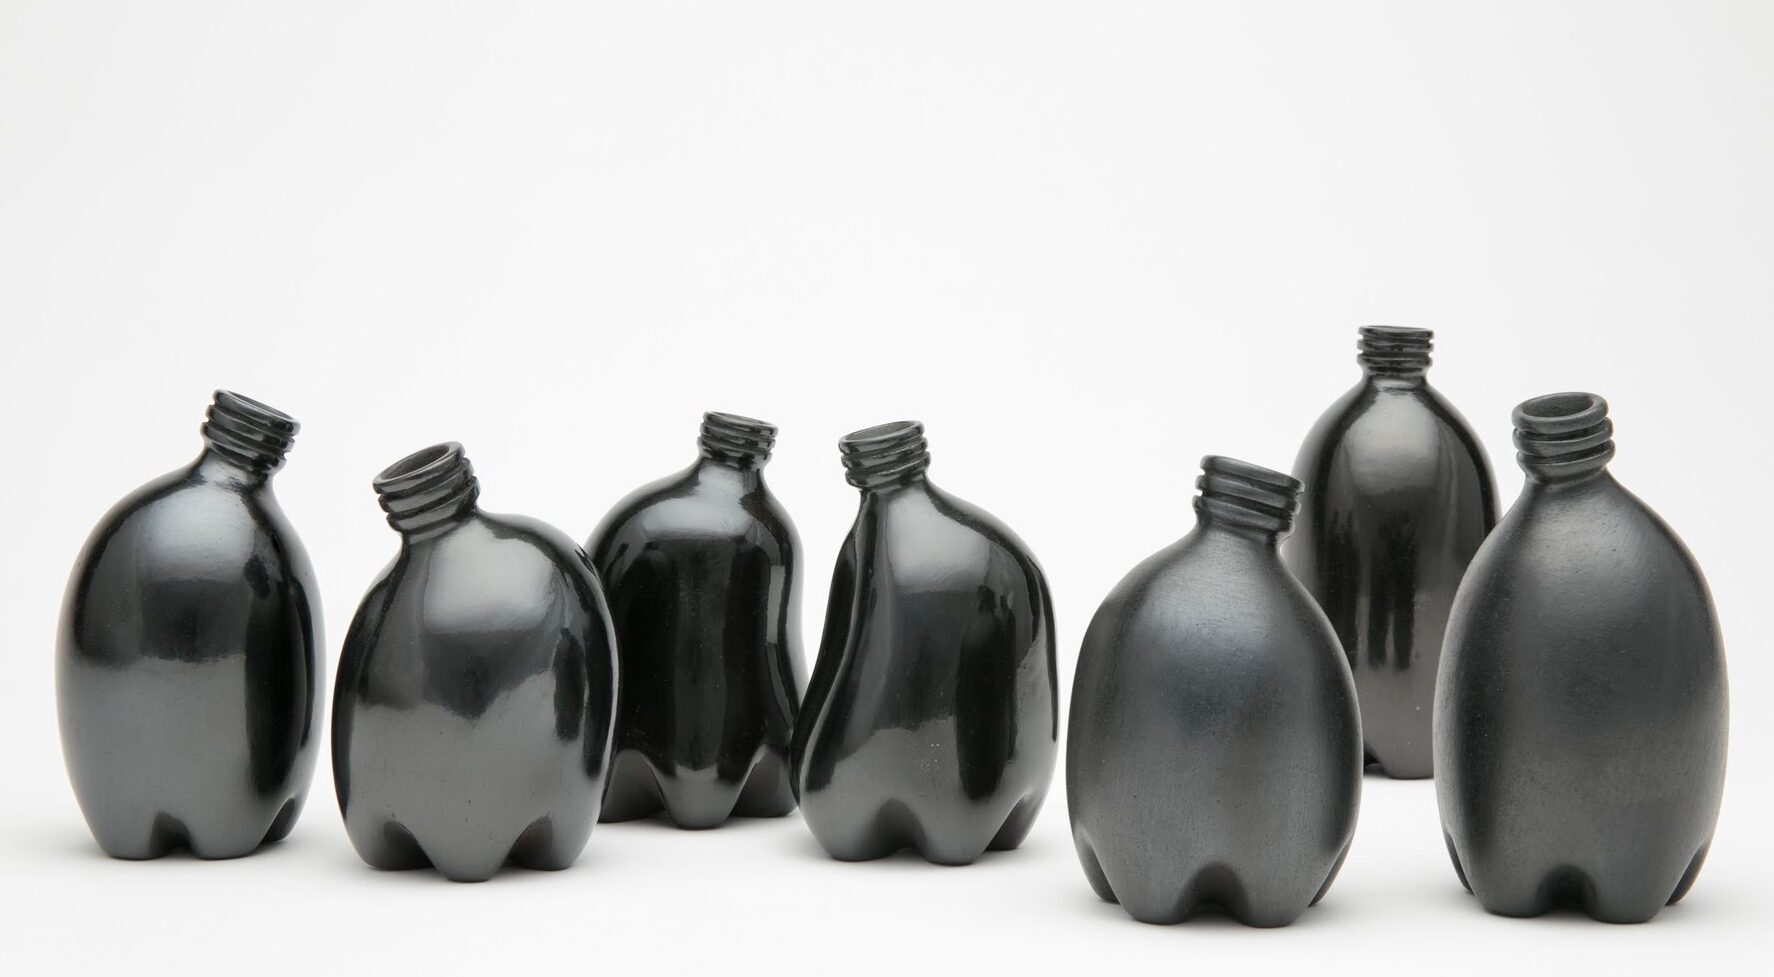 Against a stark white background are seven small clay vessels painted a dark, shiny black. They look like miniature plastic water bottles and are each slightly bent, making them appear like a gathering of people interacting.